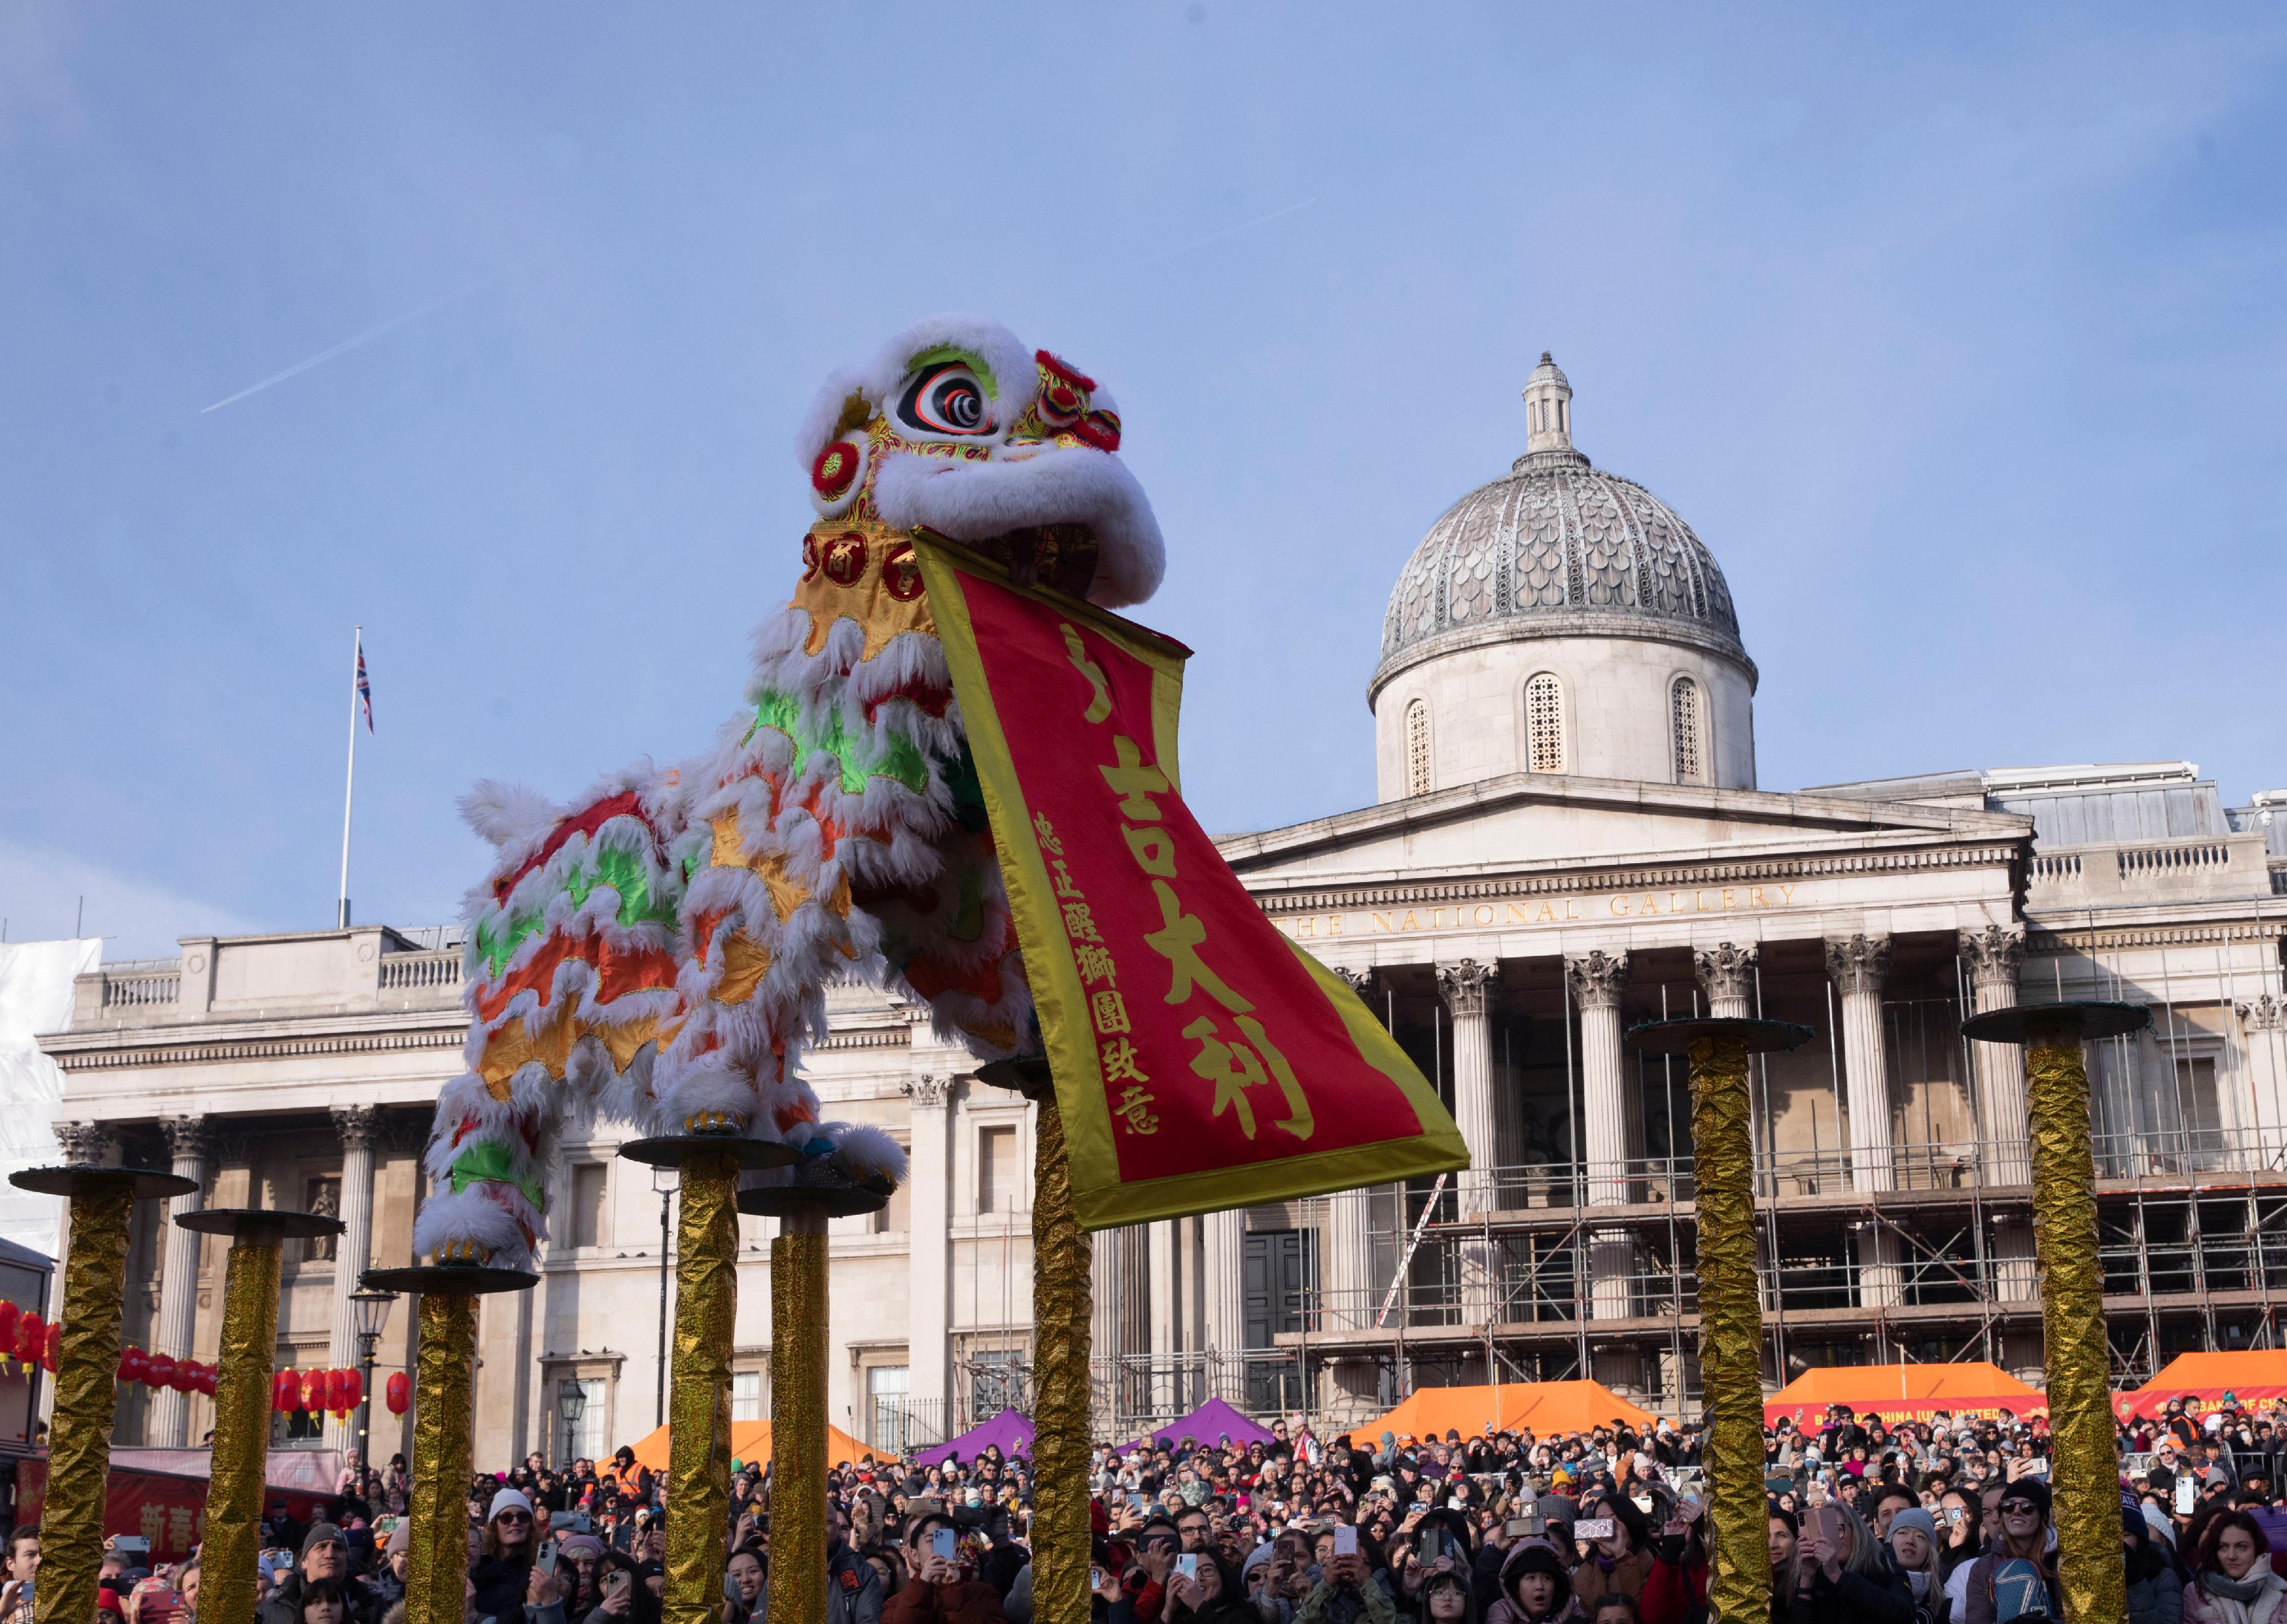 The Hong Kong Economic and Trade Office, London (London ETO) participated in a large-scale London Chinatown celebration in Trafalgar Square, Chinatown and Charing Cross Road on January 22 (London time).  Photo shows the lion dance performance at Trafalgar Square.